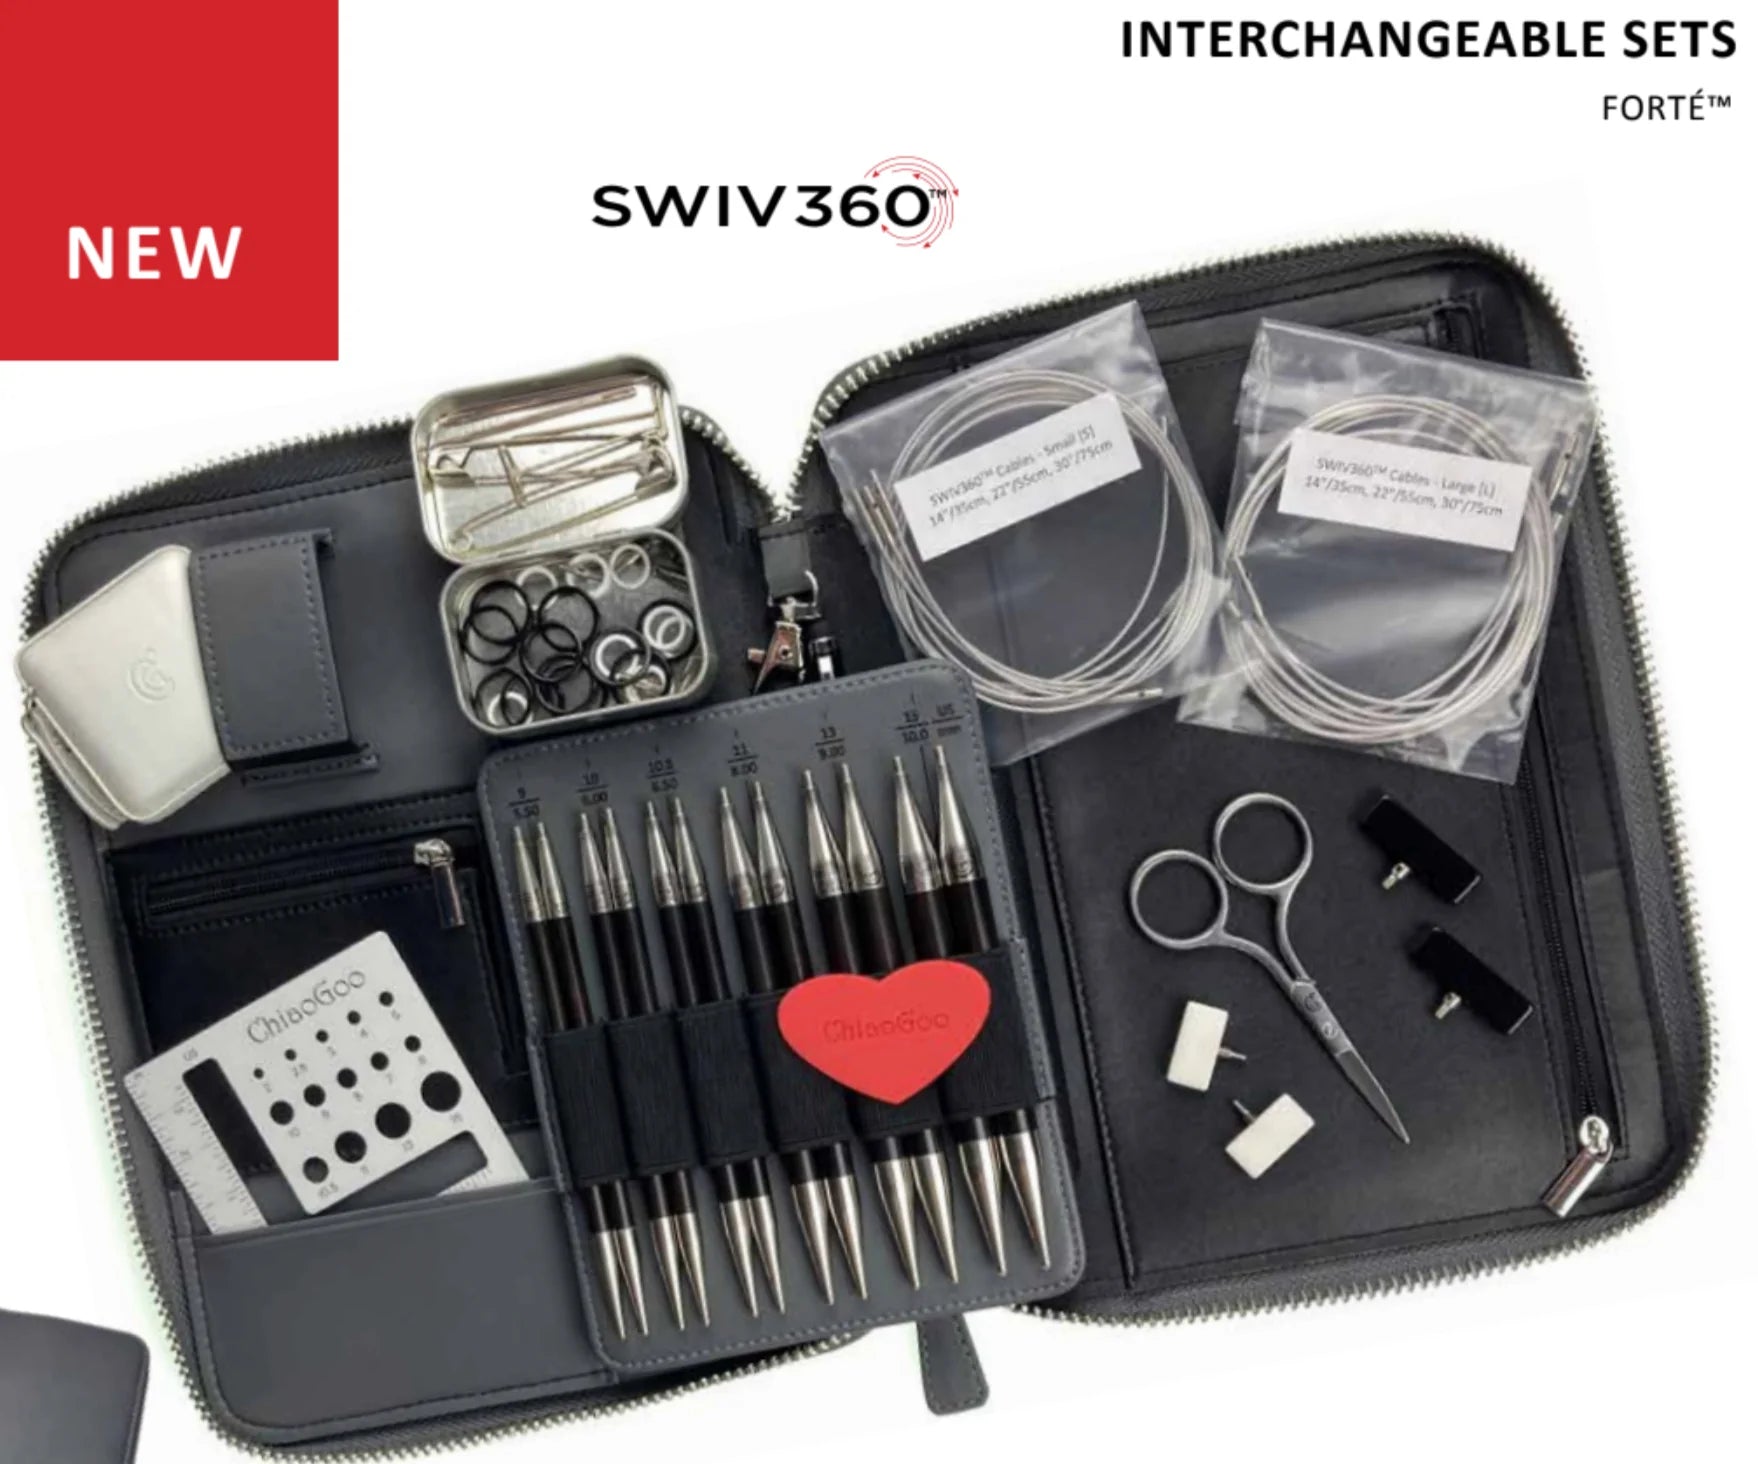 ChiaoGoo’s newest Special Edition interchangeable set, Forté, includes tips that are an elegant combination of sleek, stainless steel and luxurious, African Blackwood. This is the Rolls Royce of Interchangeable Stainless Steel Circular Needle systems!